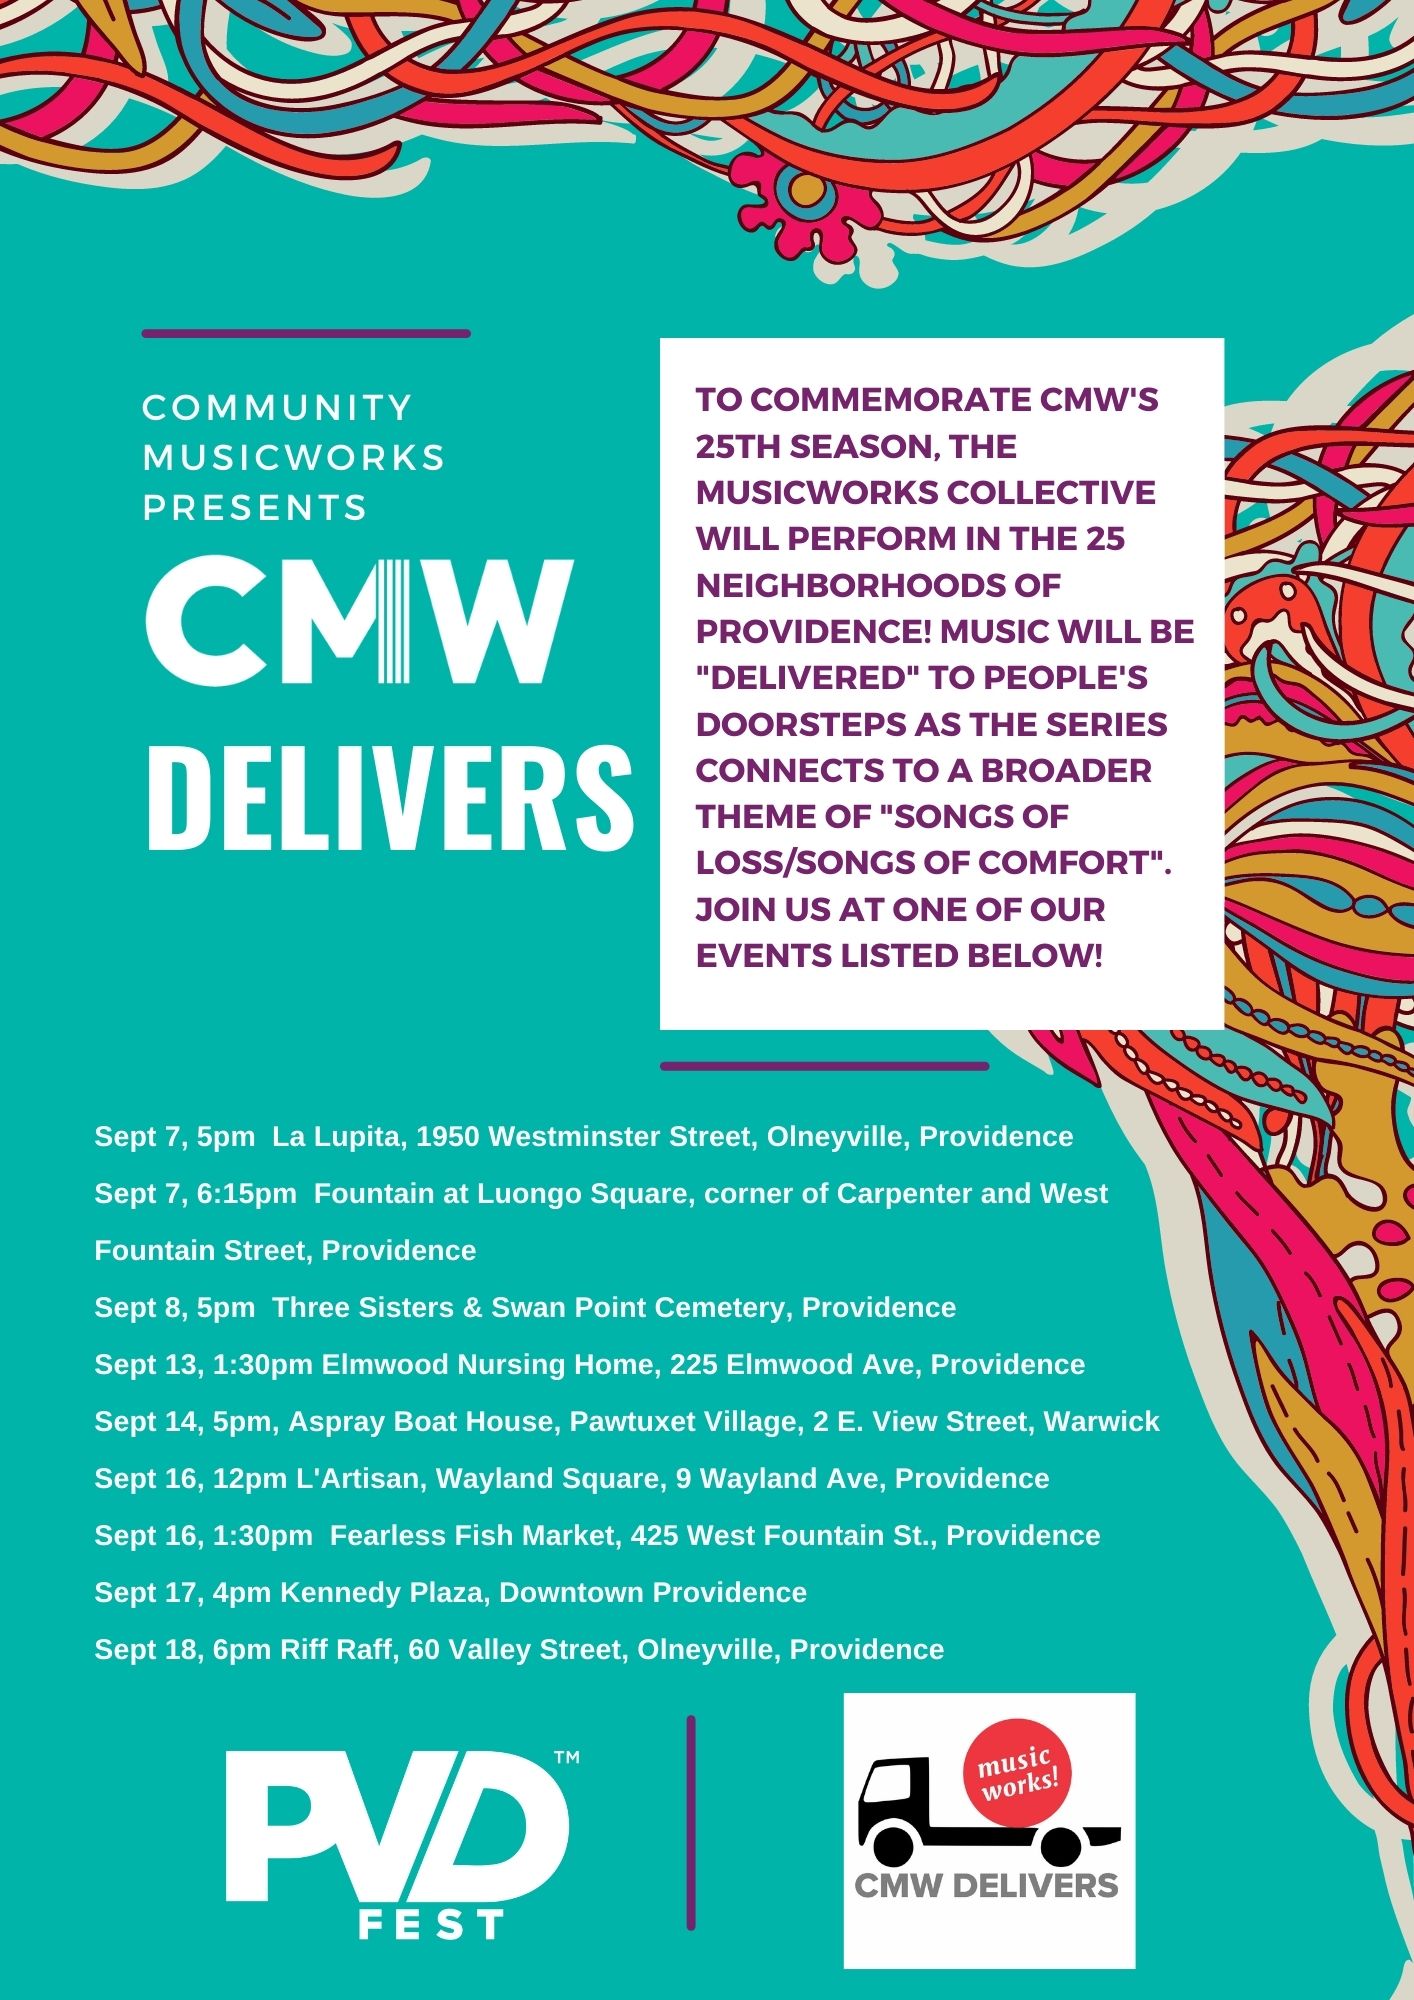 CMW Delivers! MusicWorks Collective Series in 25 Neighborhoods of PVD